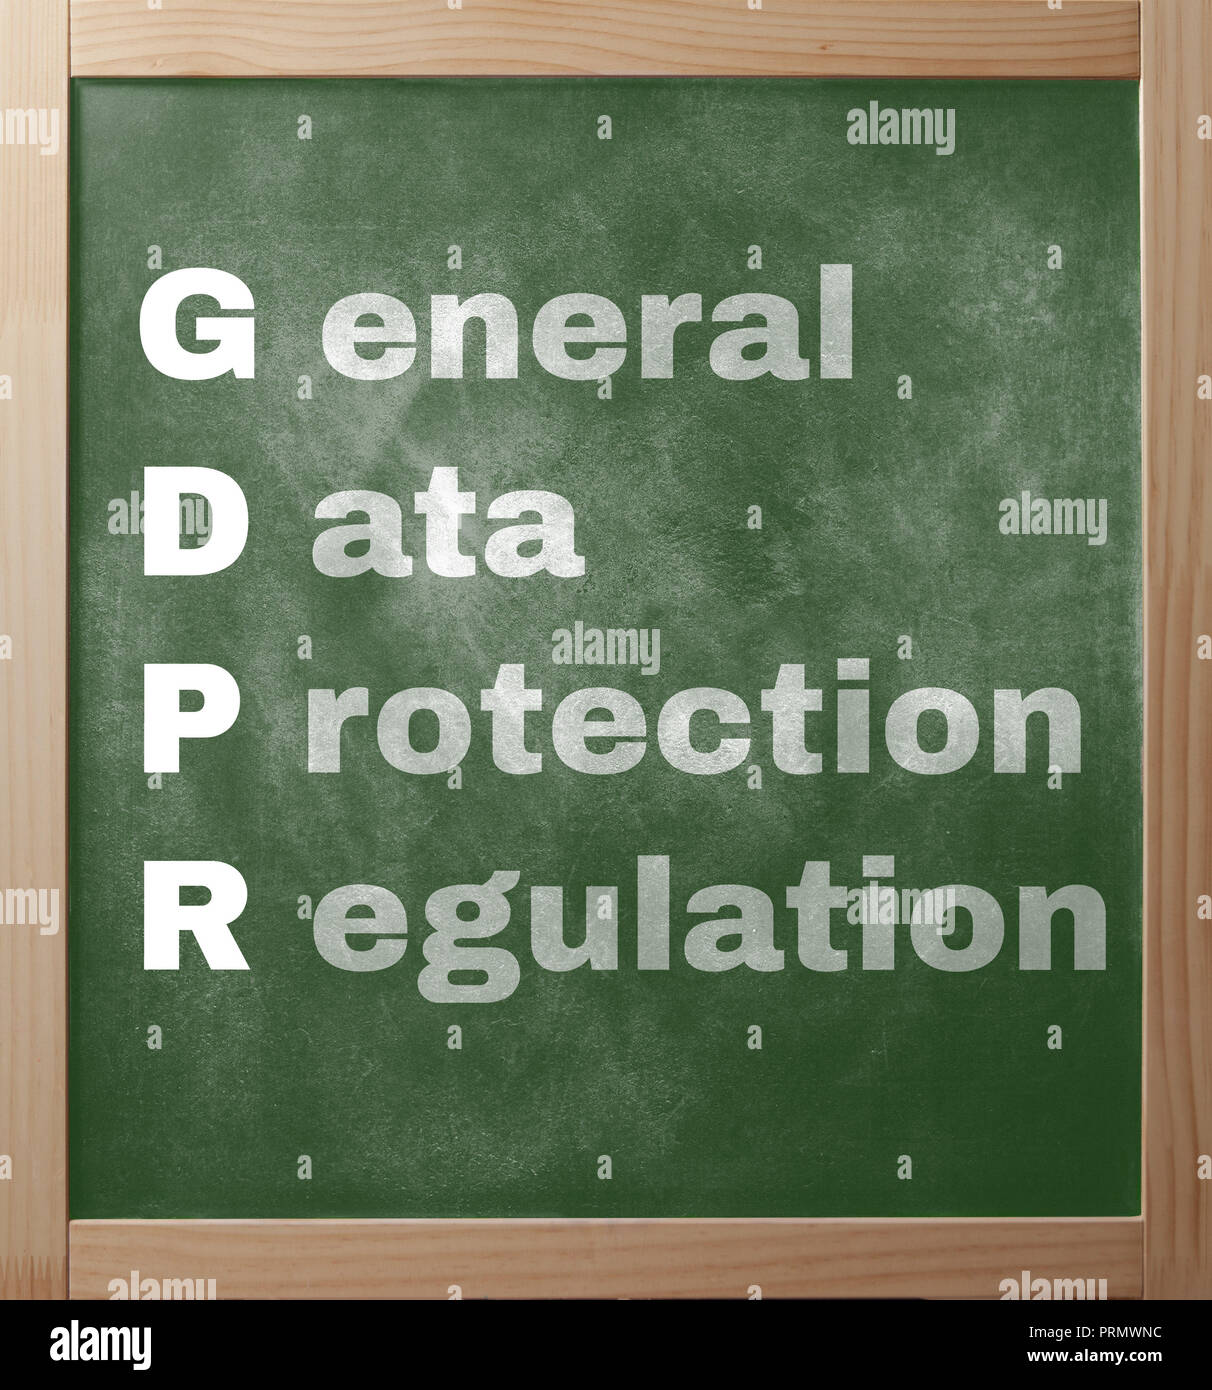 General Data Protectioin Regulation text on school greenboard in wooden frame Stock Photo